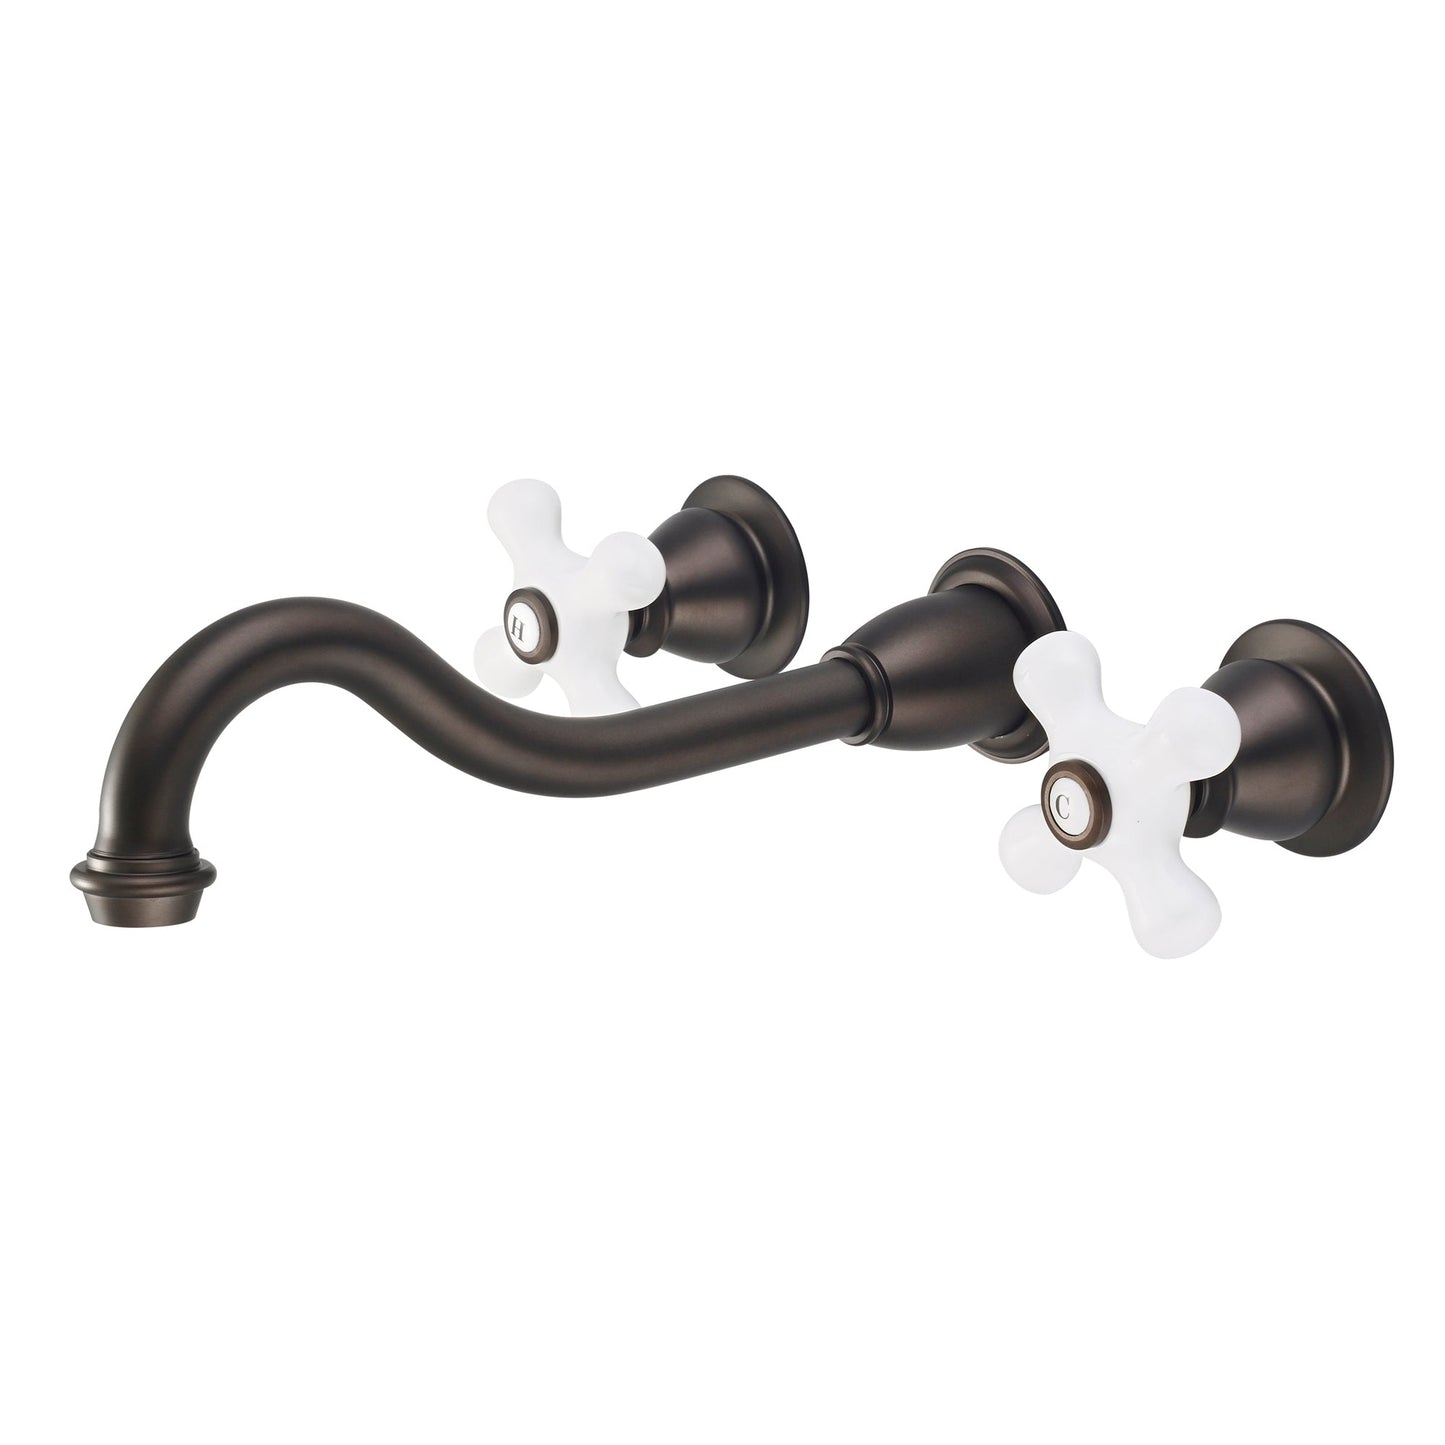 Water Creation Elegant Spout Wall Mount Vessel/Lavatory F4-0001 8" Brown Solid Brass Faucet With Porcelain Cross Handles, Hot And Cold Labels Included